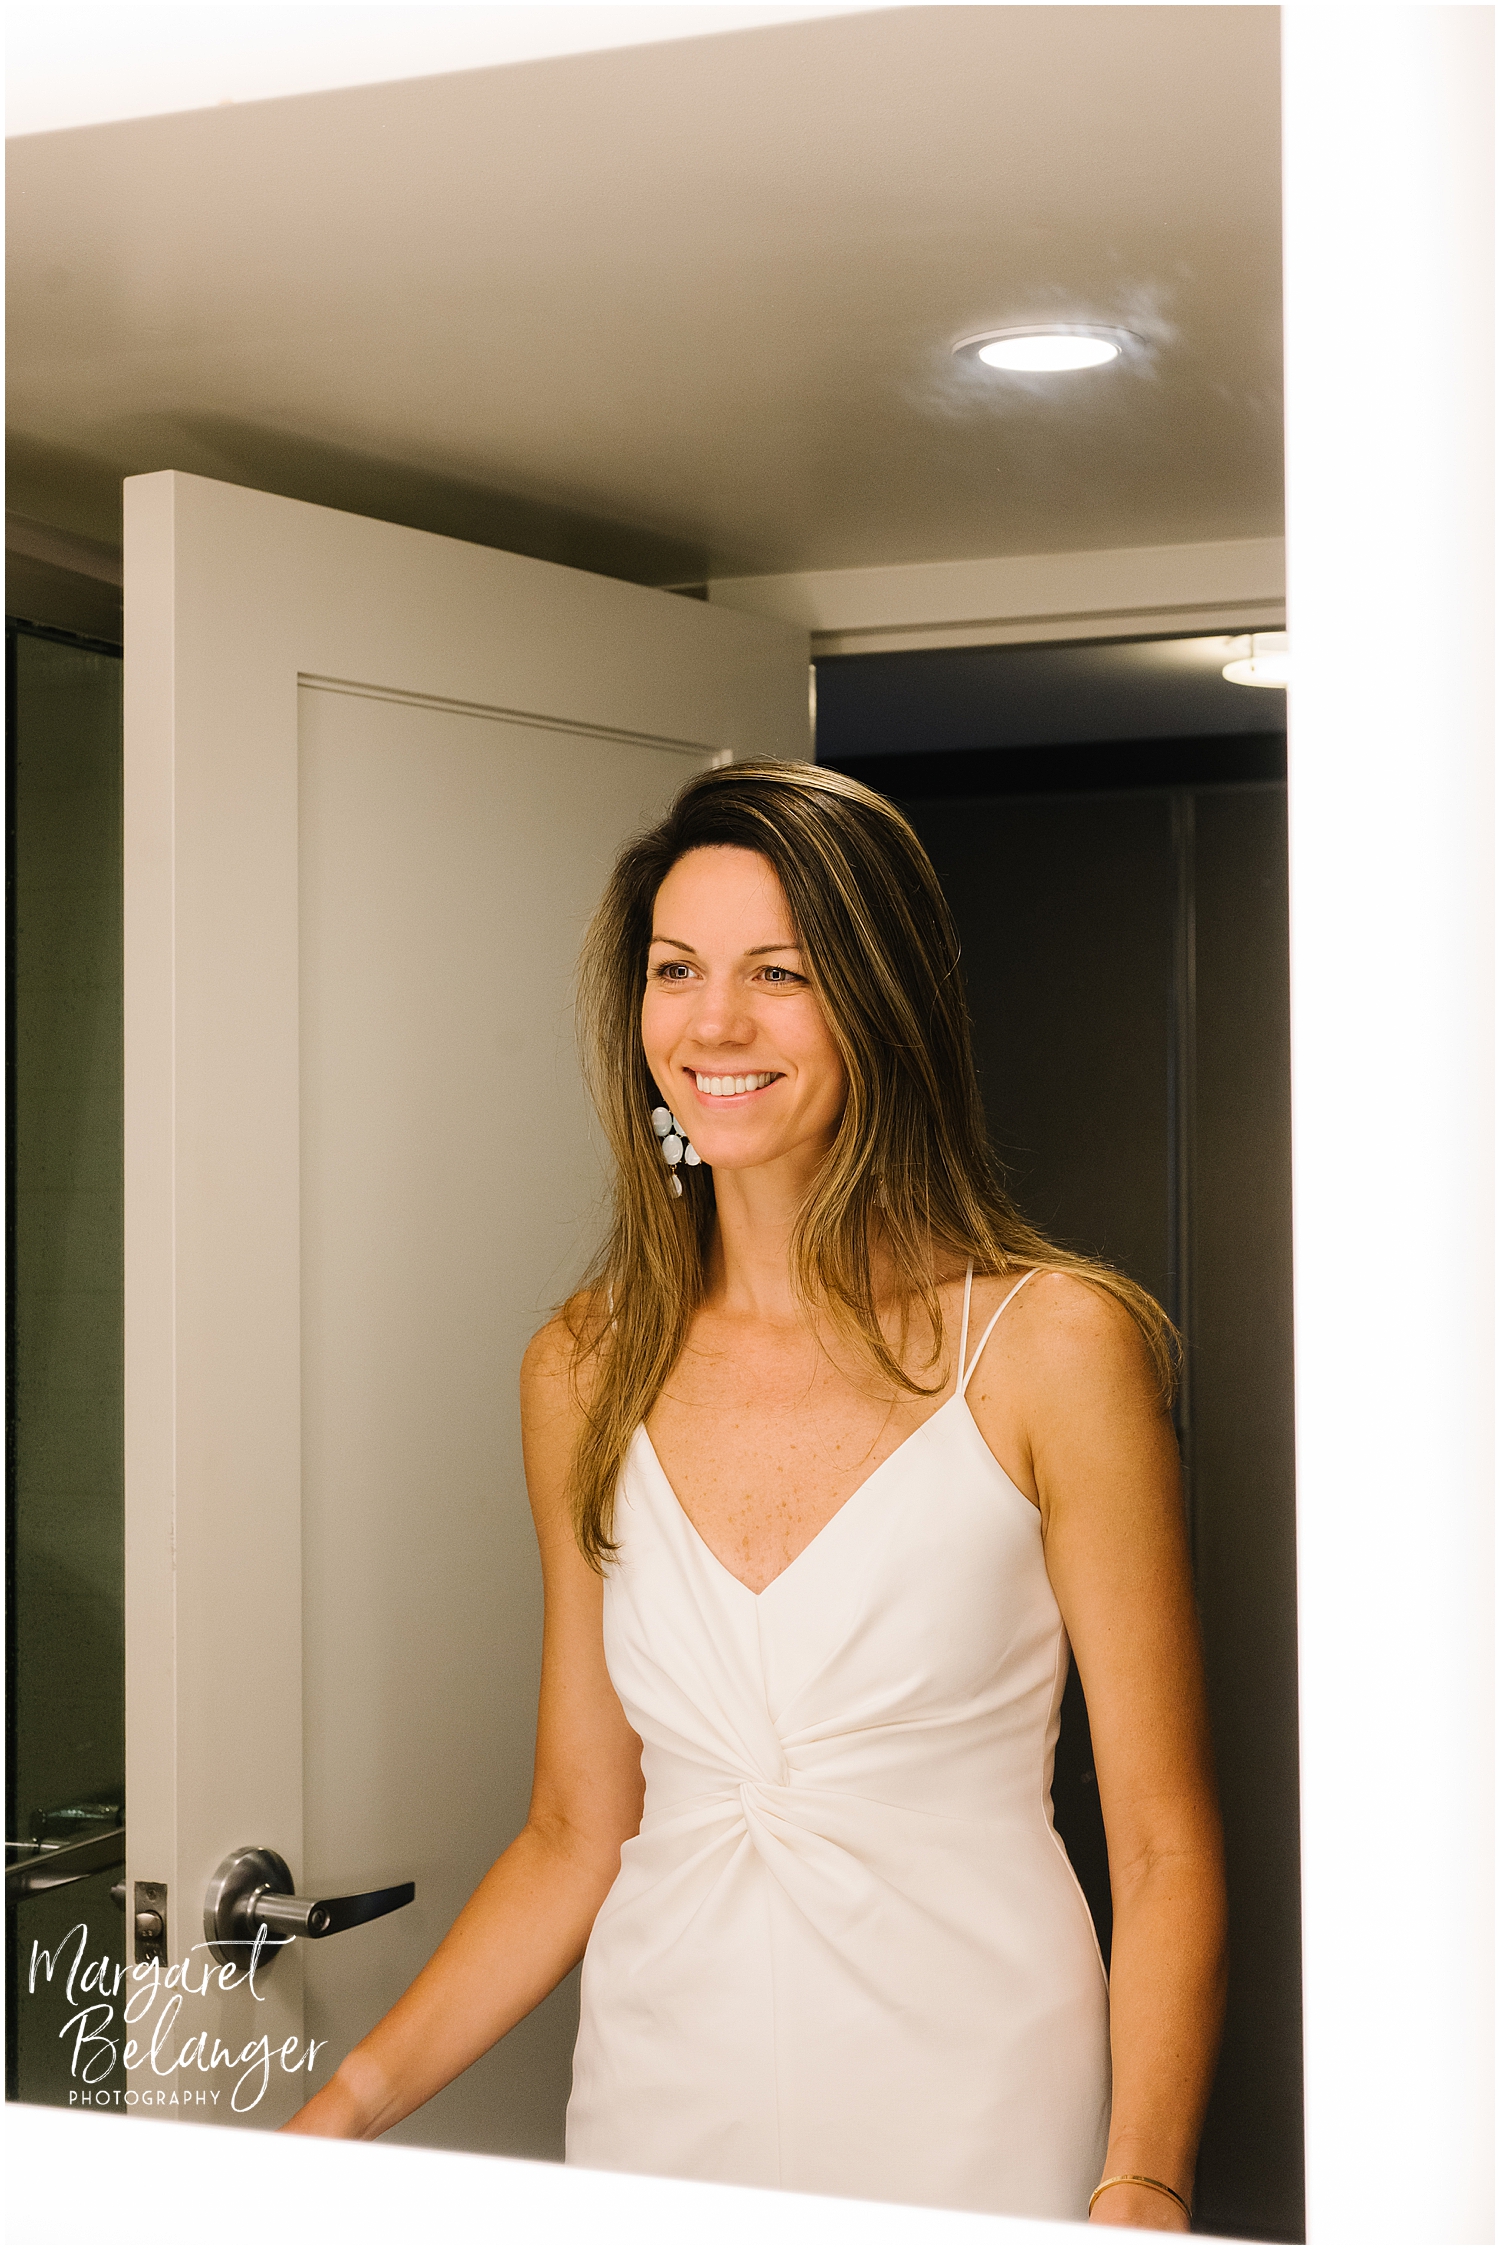 A smiling bride in a white dress standing in front of a mirror.